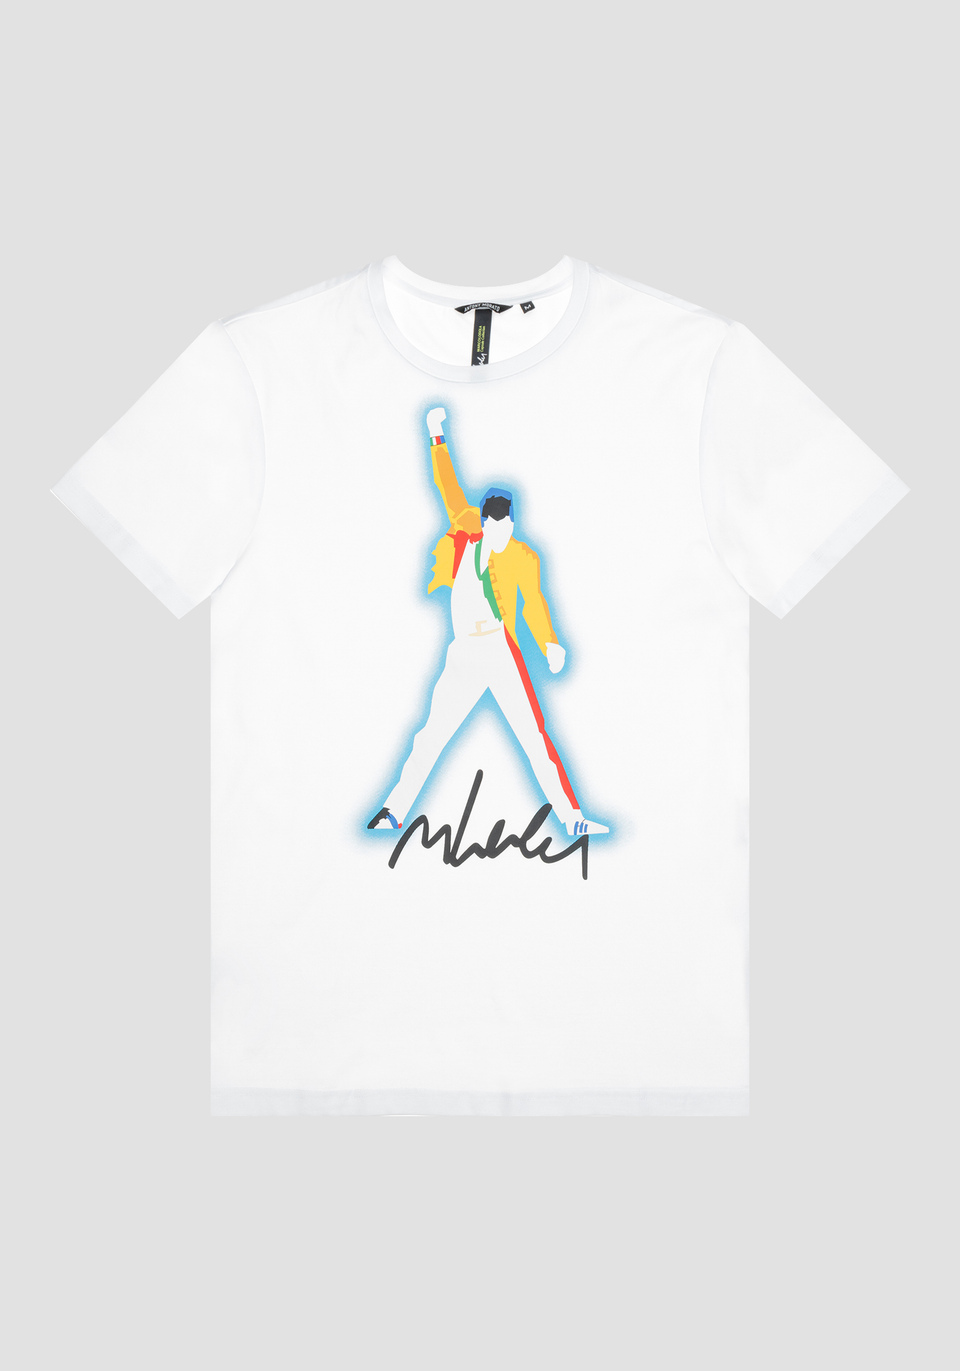 SLIM-FIT T-SHIRT IN PURE COTTON WITH FREDDIE MERCURY PRINT BY MARCO LODOLA - Antony Morato Online Shop